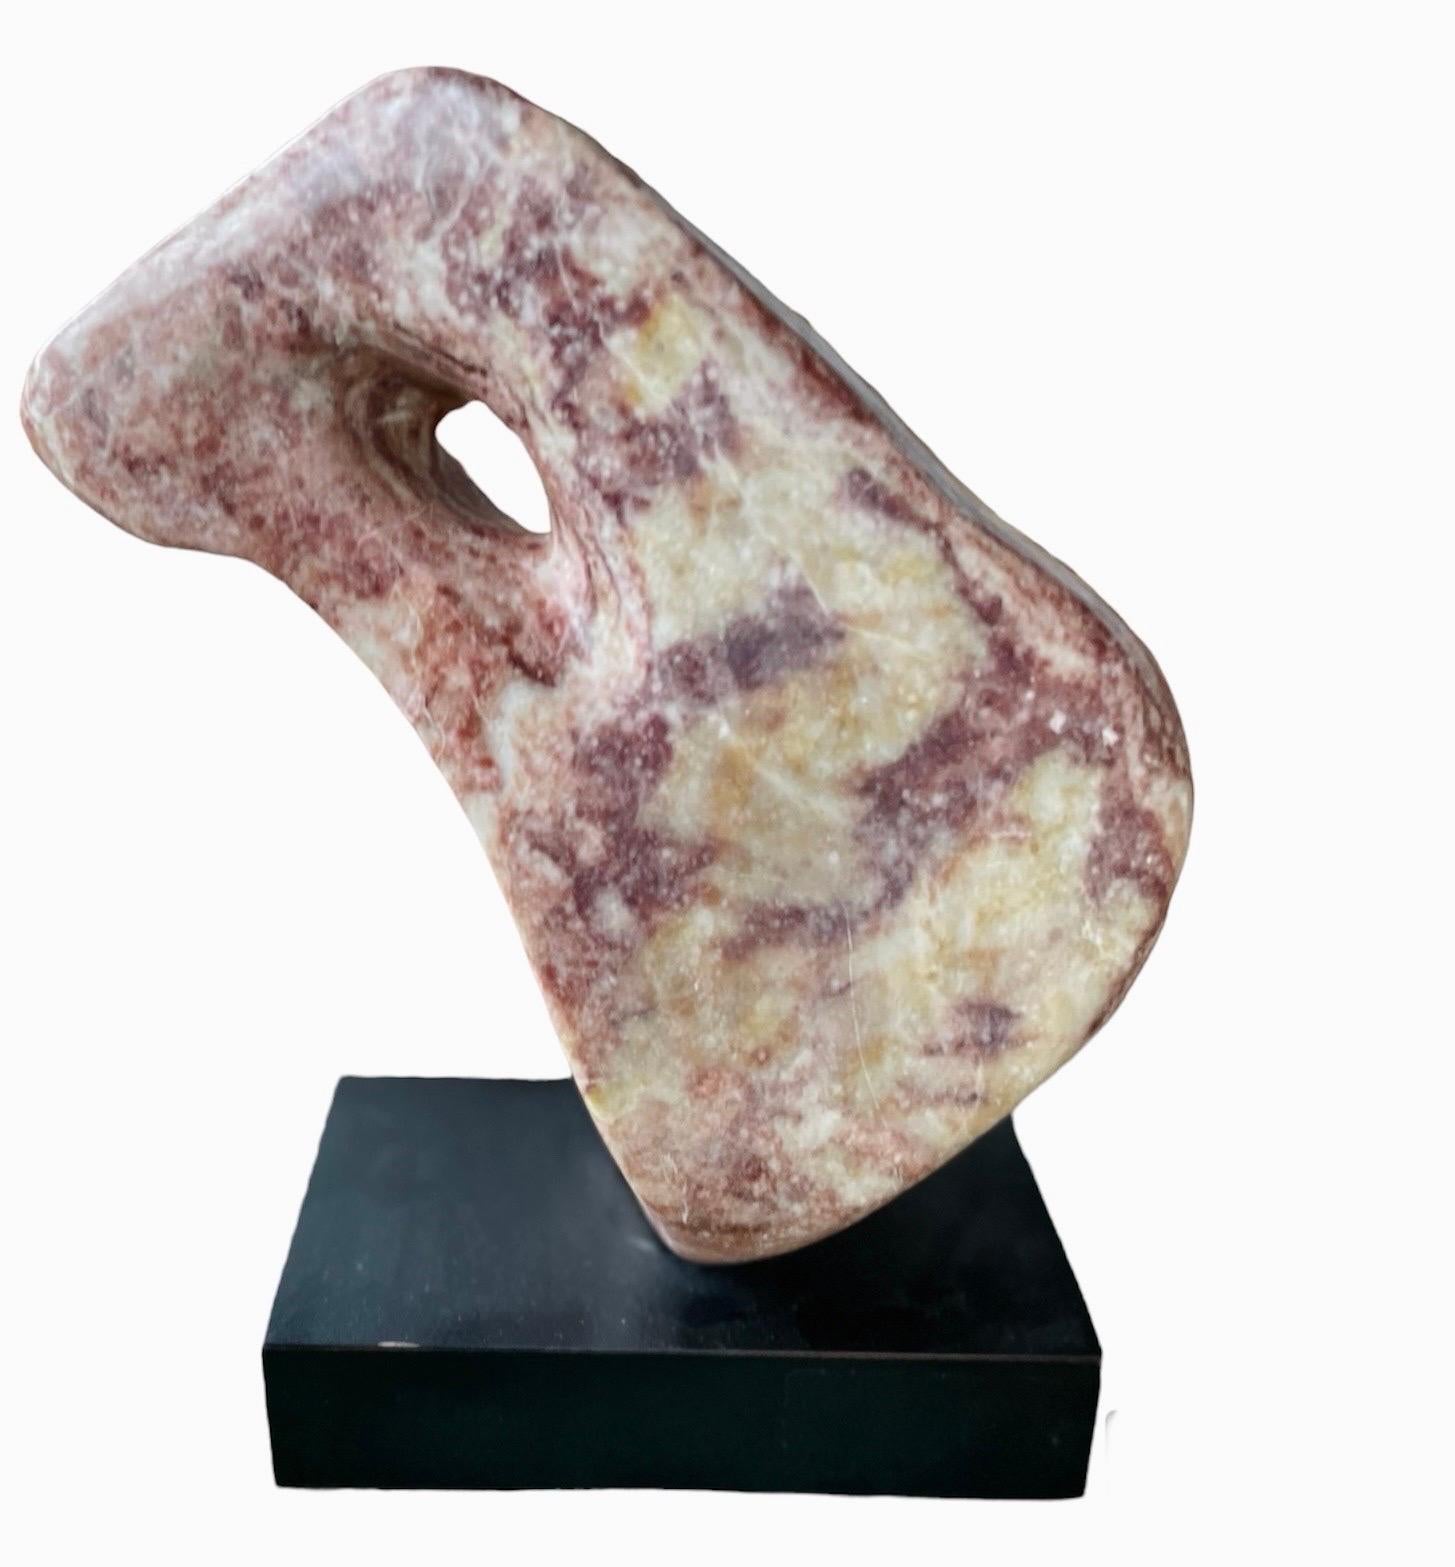  Large abstract red marble sculpture, ca 1970s.

The piece measures 14.75 inches high, 13 inches wide, and 6 inches deep.